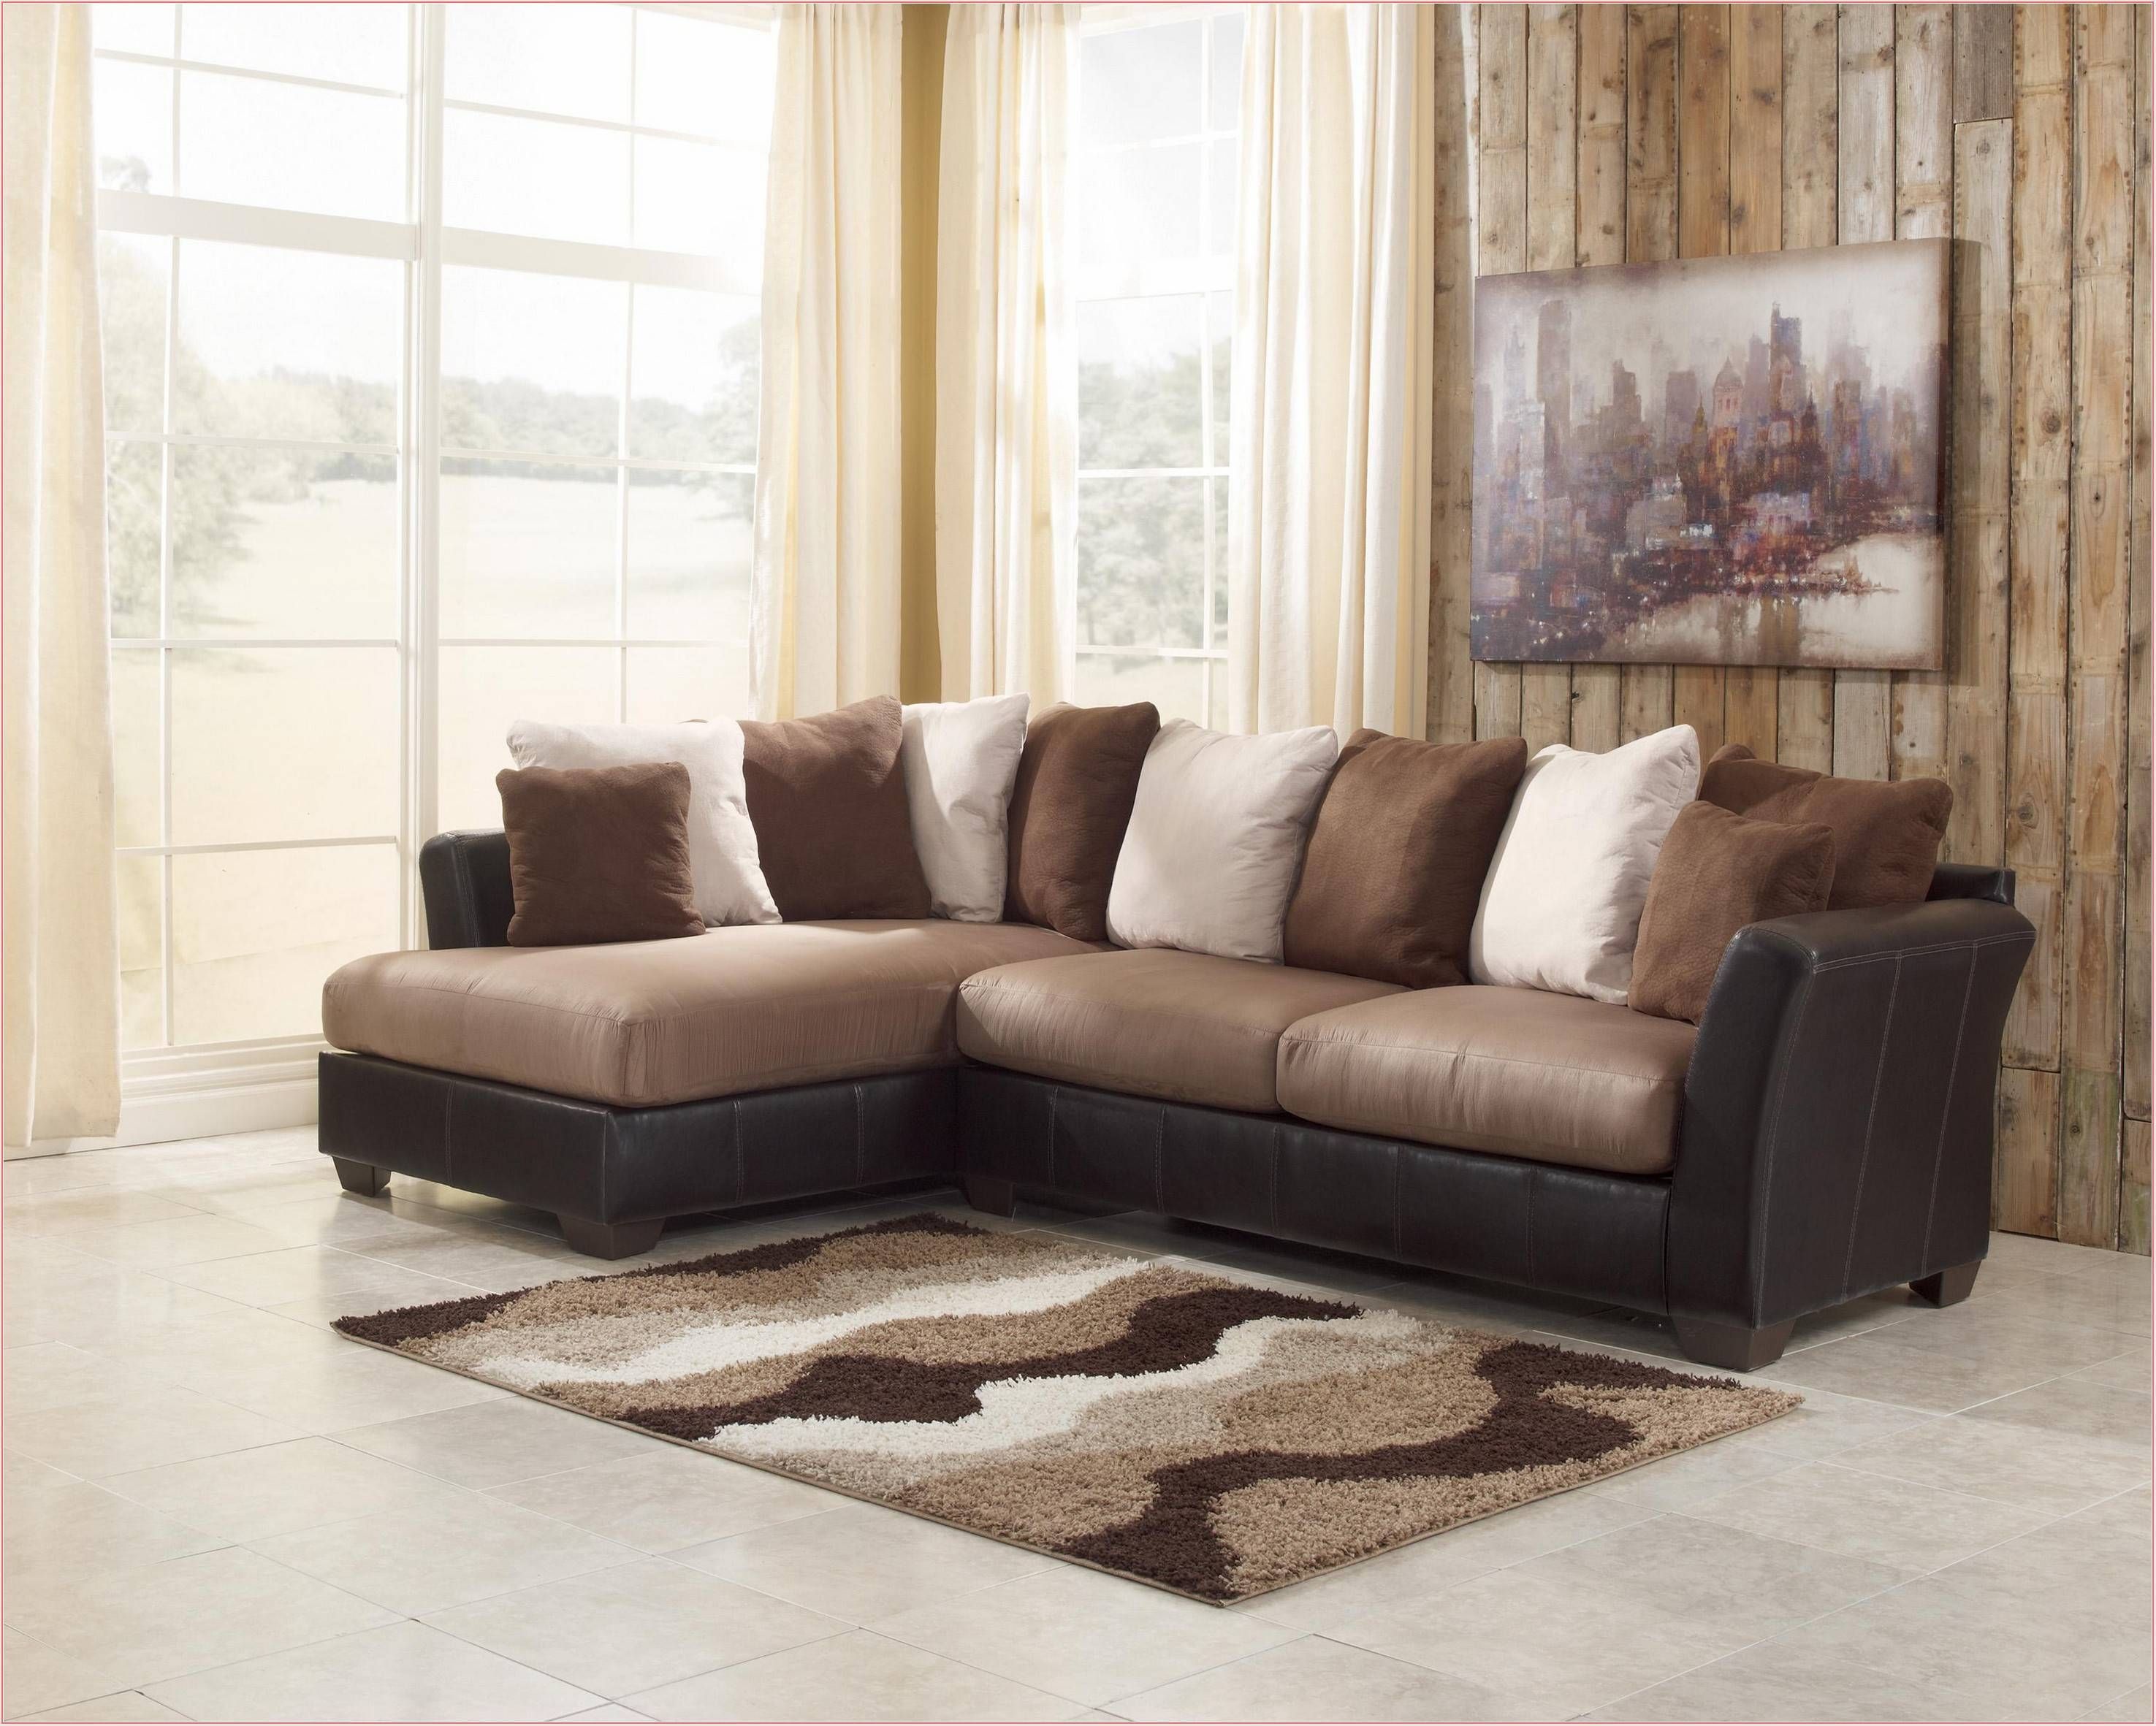 Beautiful Sectional Sofas Under 600 78 On Sectional Leather Sofas Throughout Sectional Sofas Under  (View 5 of 30)